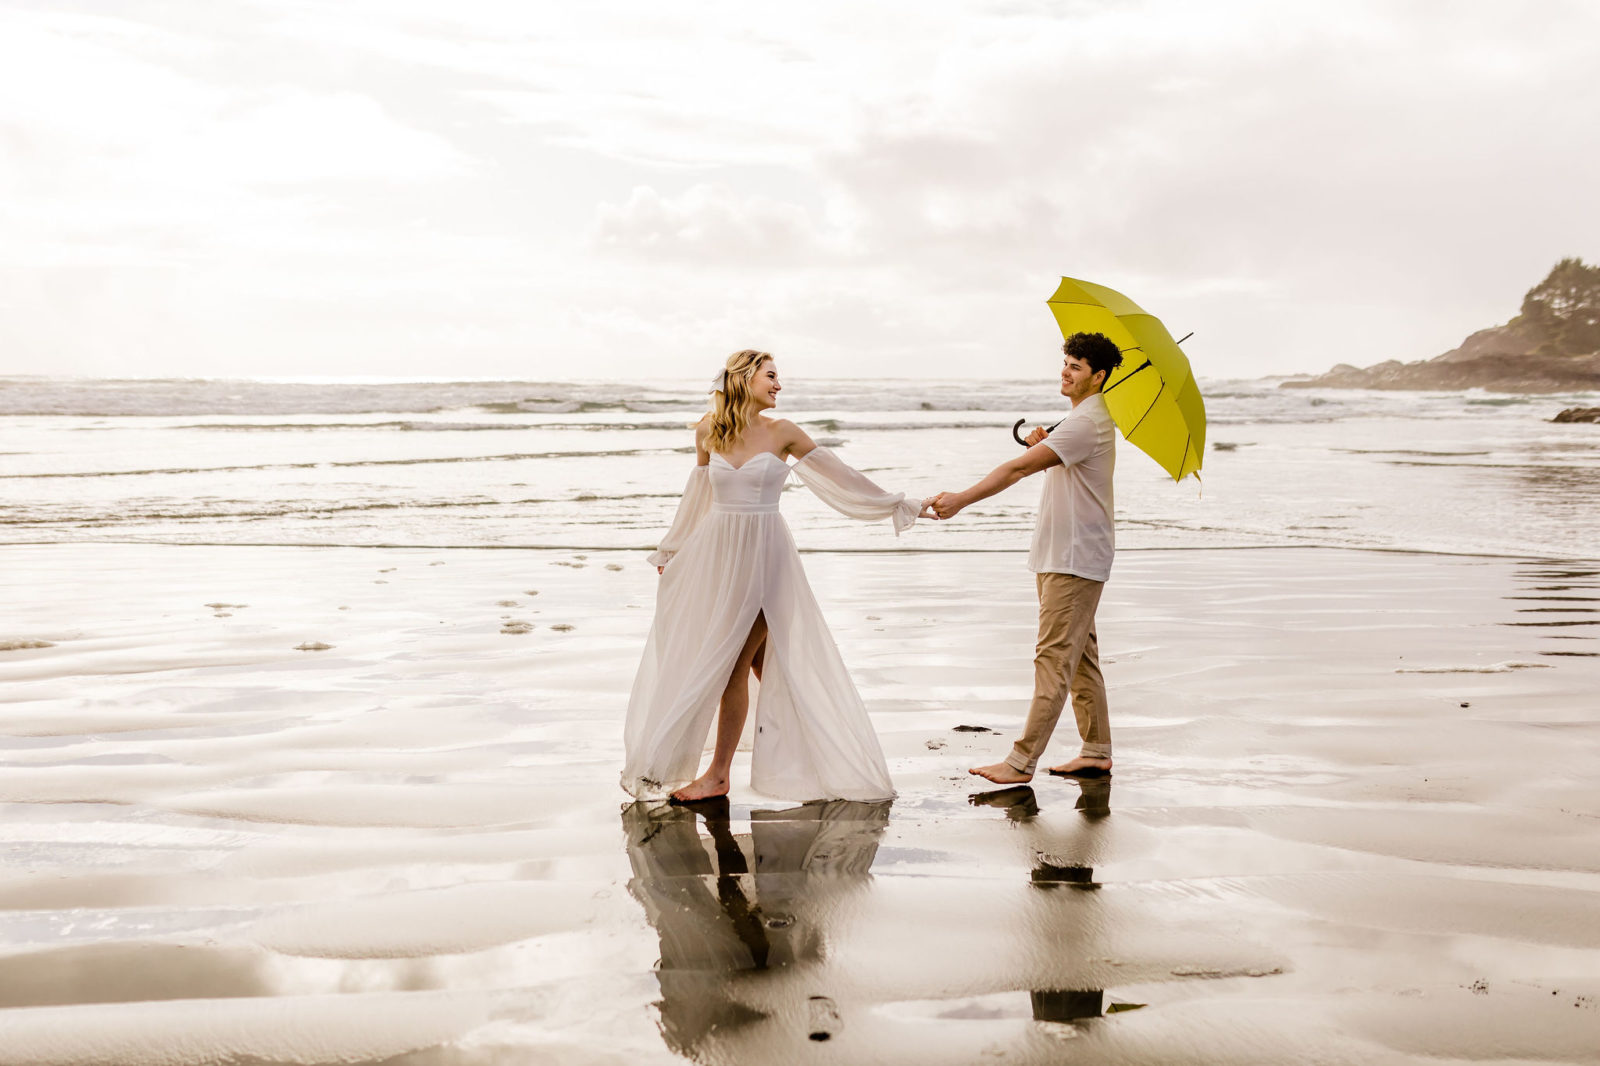 Creative engagement session on beaches of Tofino, beach portraits, beach engagement